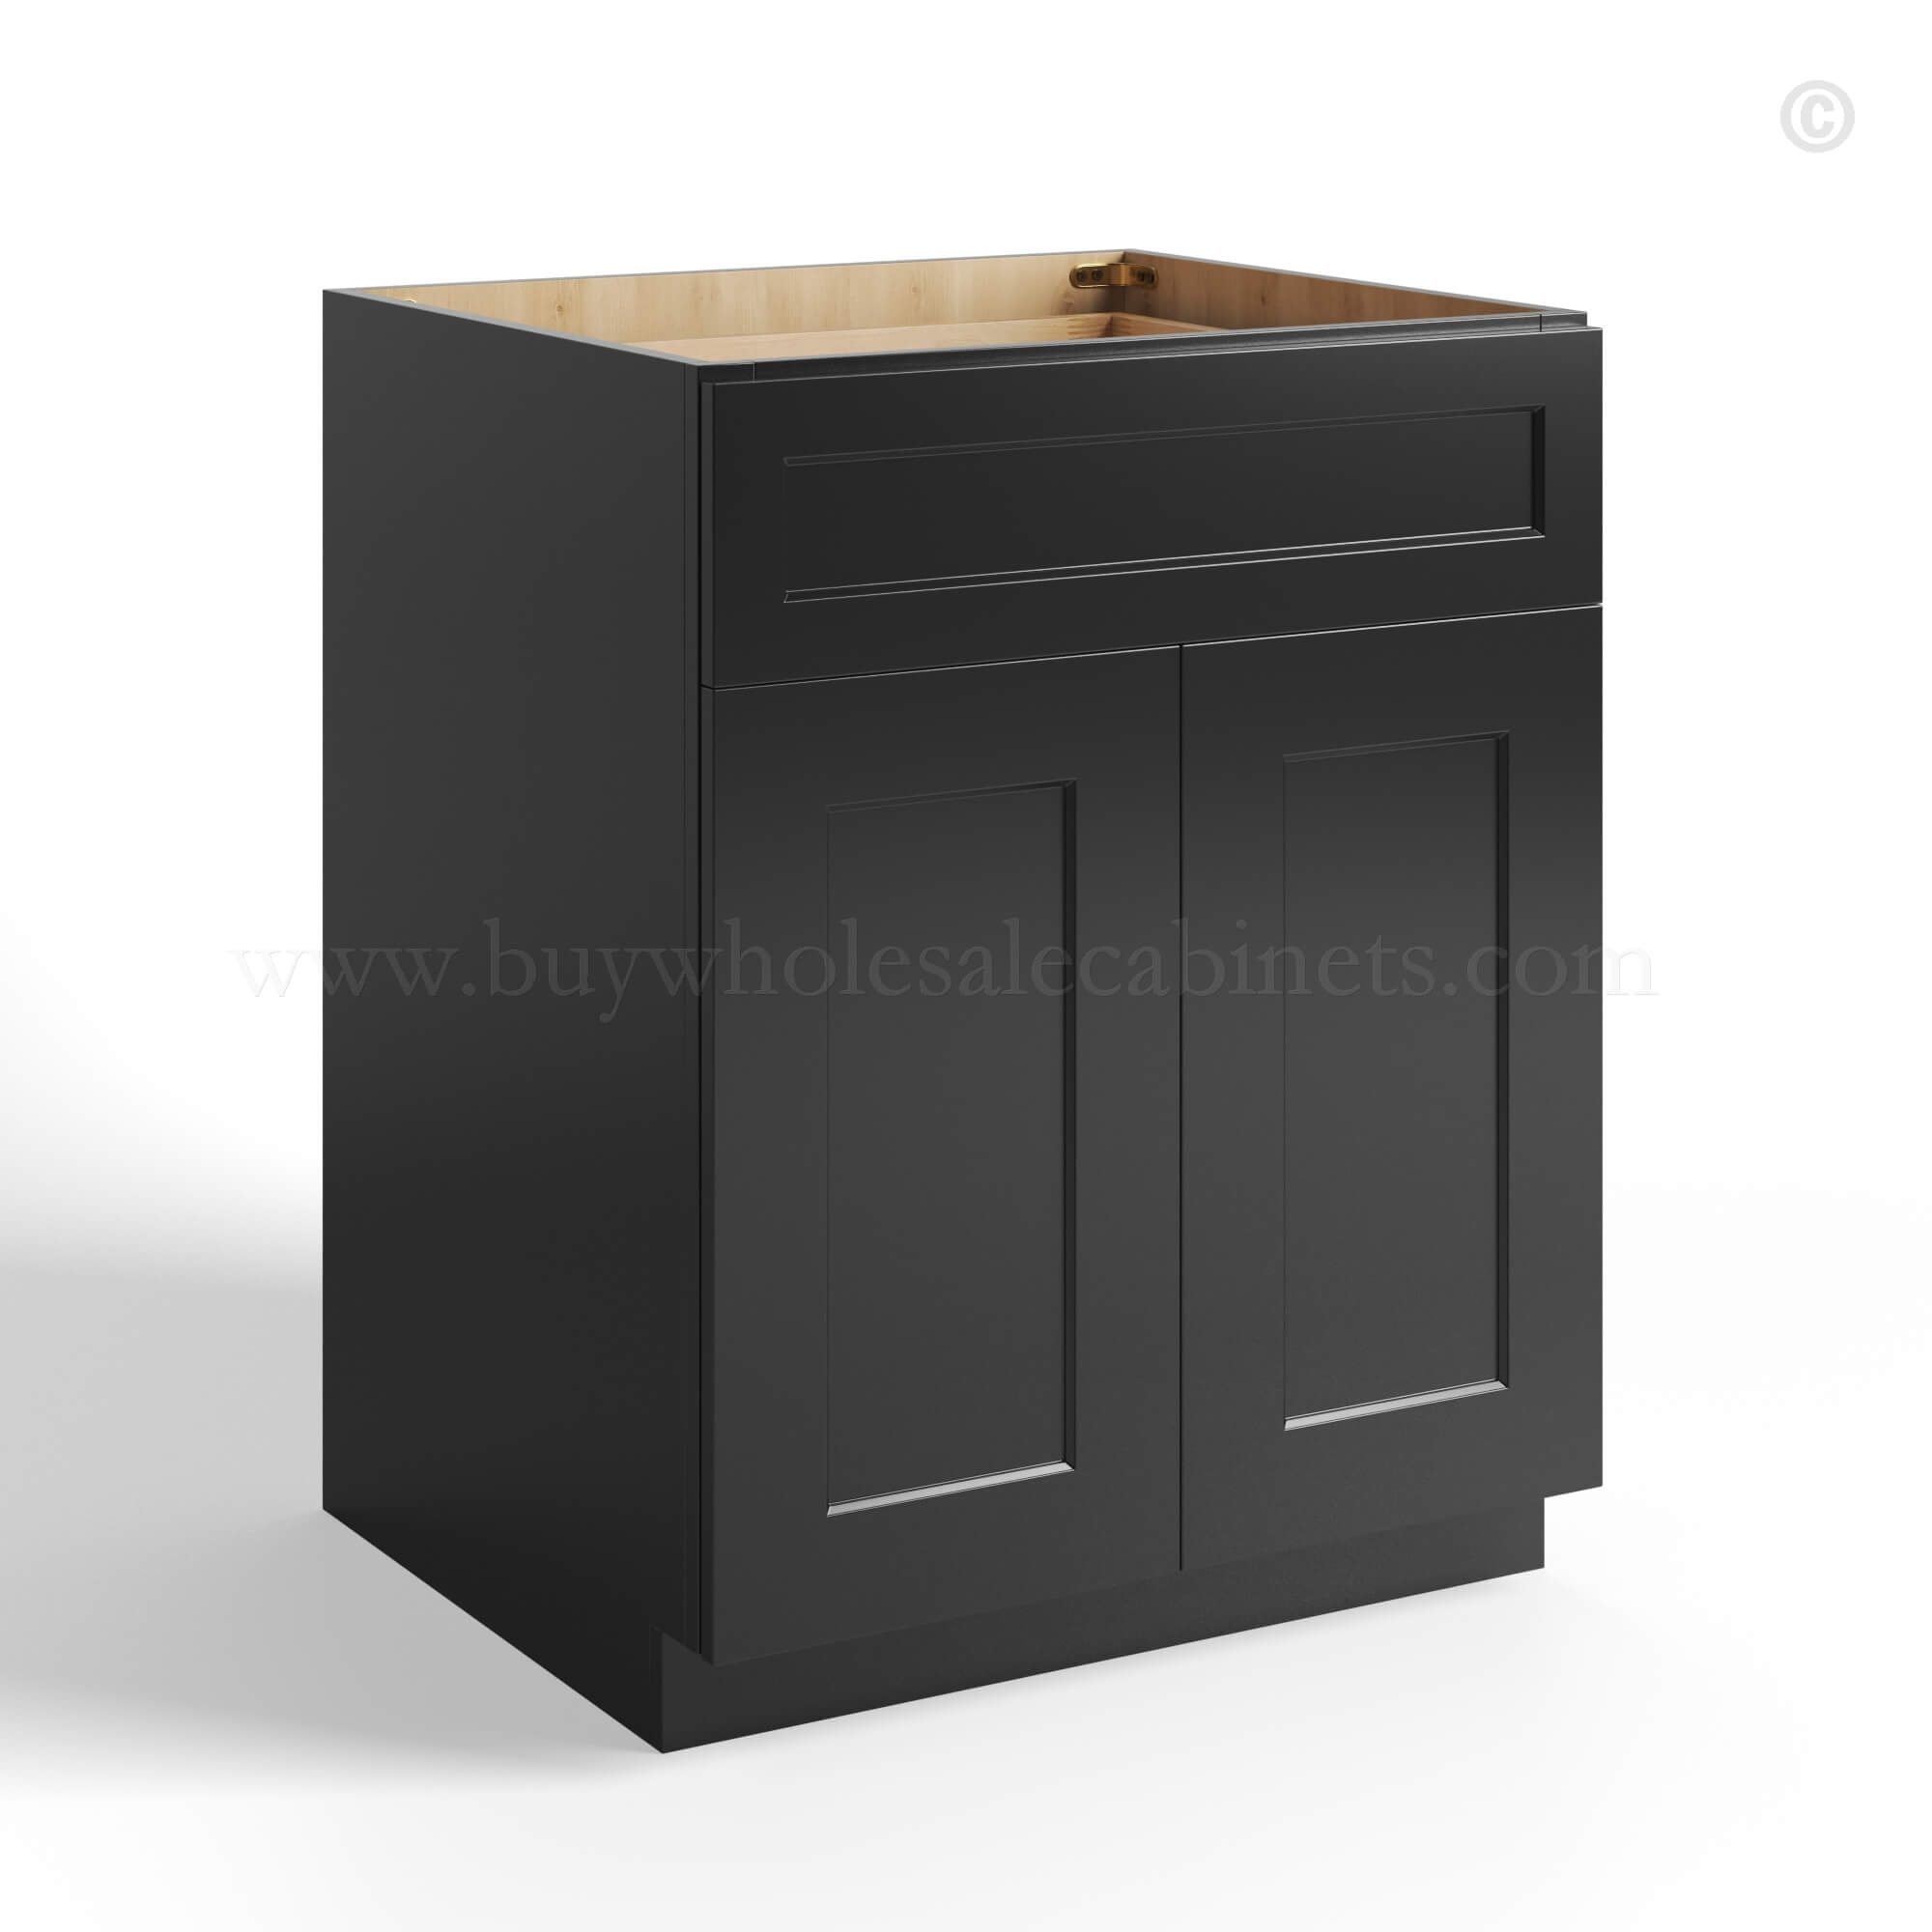 Black Shaker Base Cabinet Double Door and Single Drawer, rta cabinets, wholesale cabinets